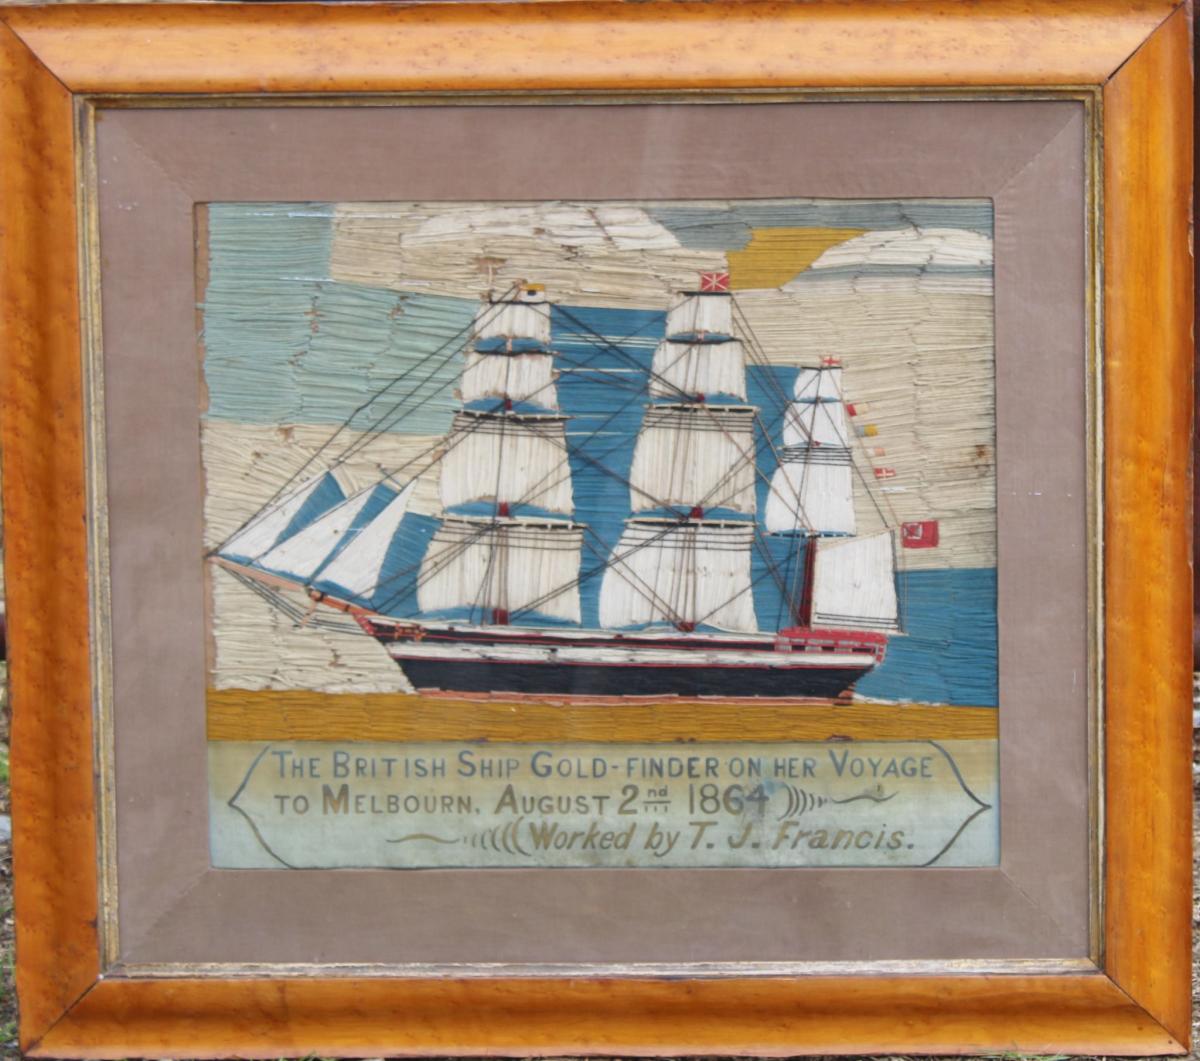 Sailor's Woolwork Nautical Woolwork Picture, Inscribed:The British Ship Gold Finder on her voyage to Melbourn, August 2, 1864. Worked by T.J. Francis